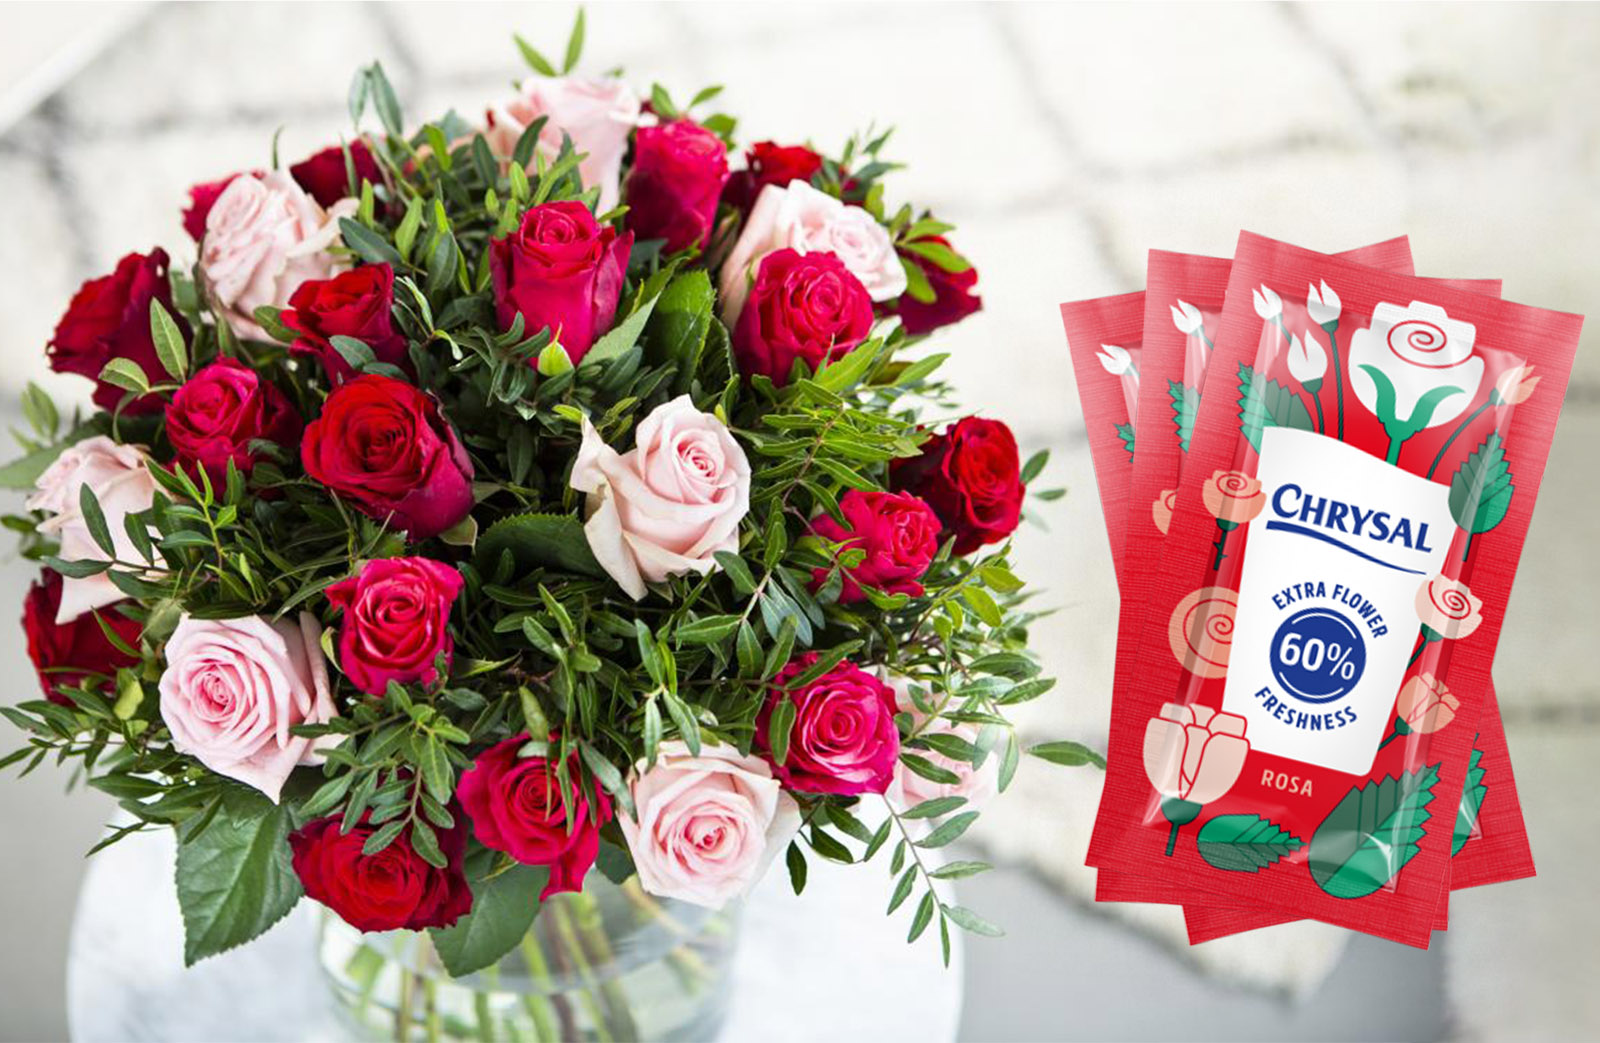 This Is How You and Your Customers Will Enjoy Your Roses Optimally - Chrysal